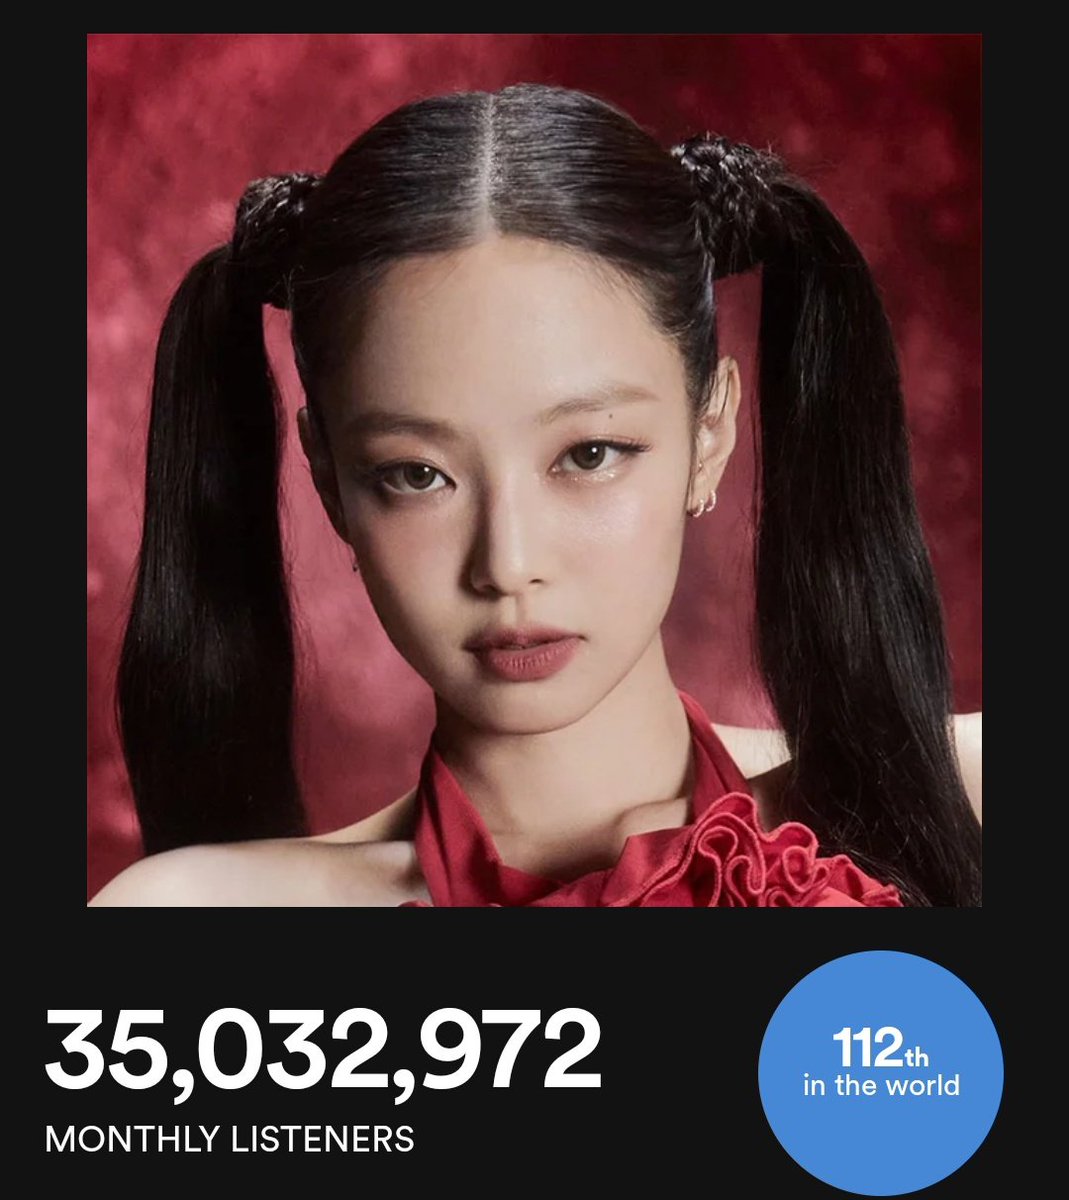 #JENNIE has once again surpassed 35 million monthly listeners on Spotify. 35,032,972 (+209,885)❤️‍🔥